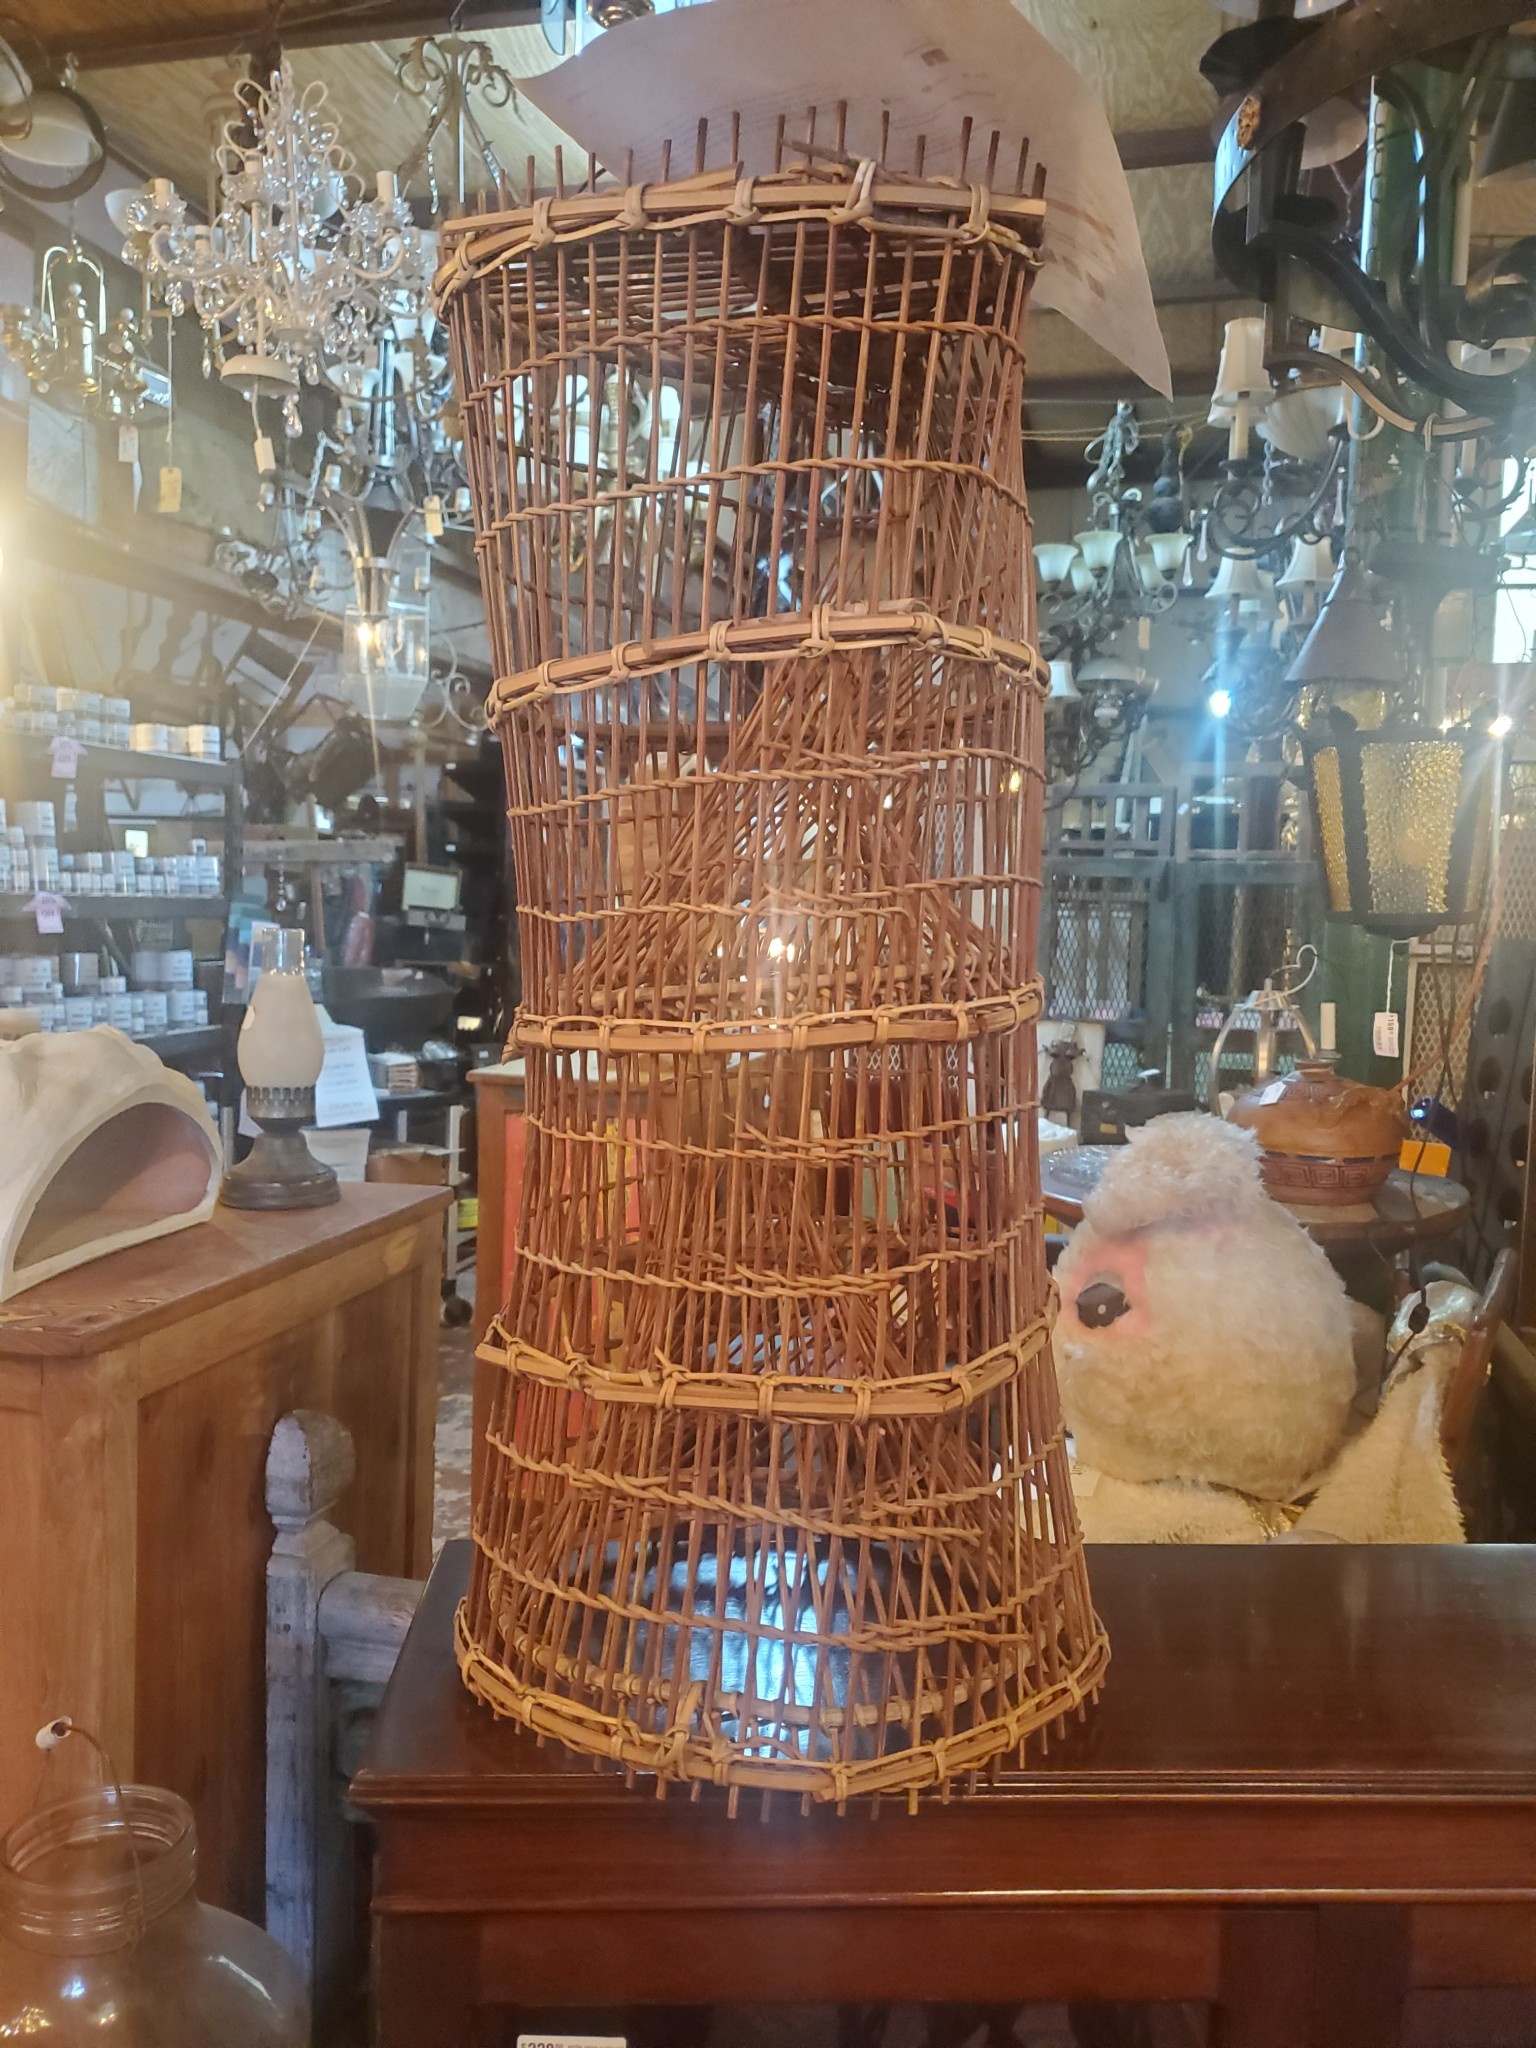 fish trap - Sarasota Architectural Salvage, 1093 Central Ave